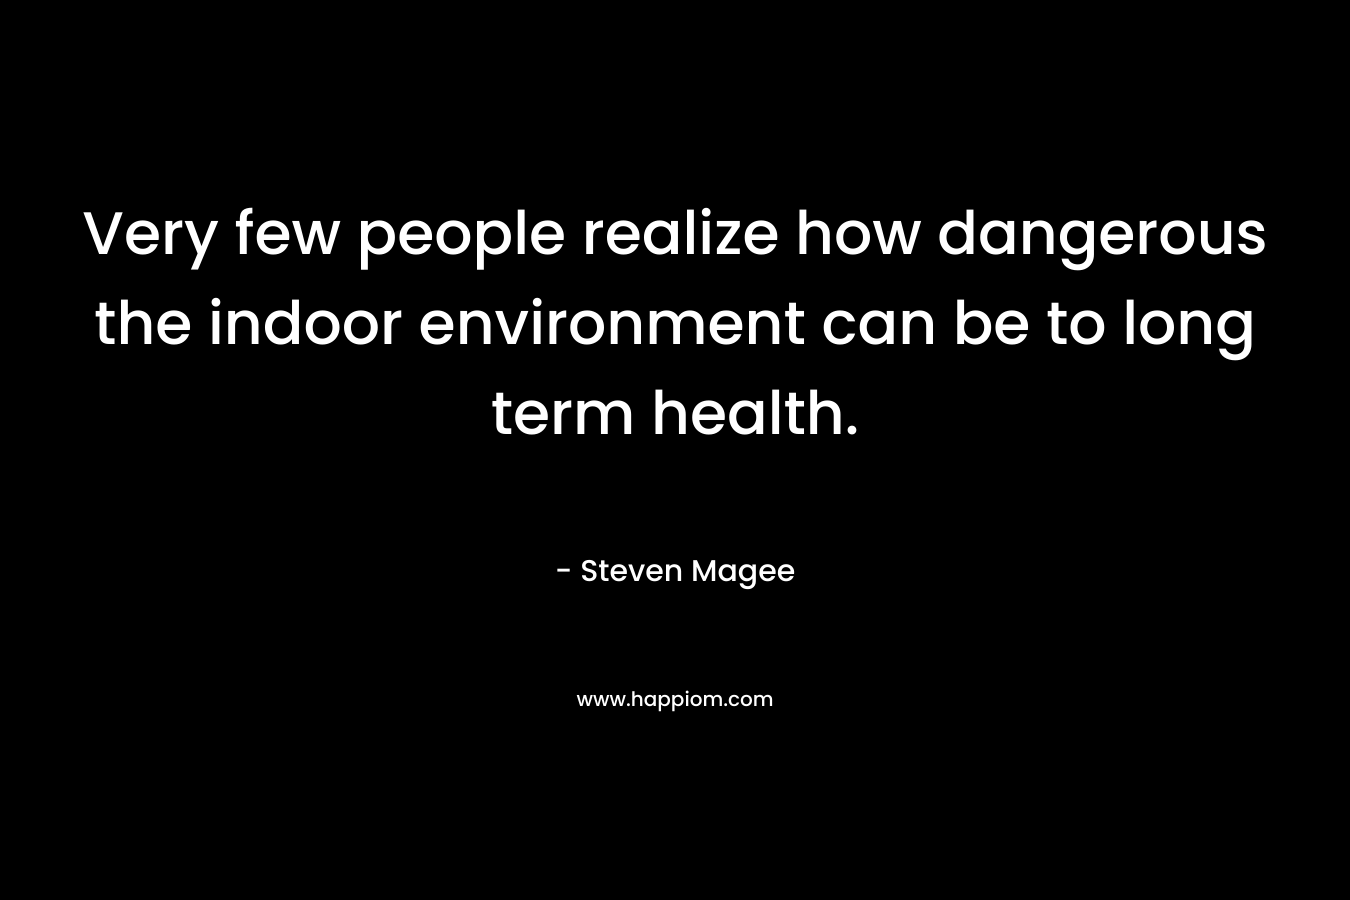 Very few people realize how dangerous the indoor environment can be to long term health. – Steven Magee